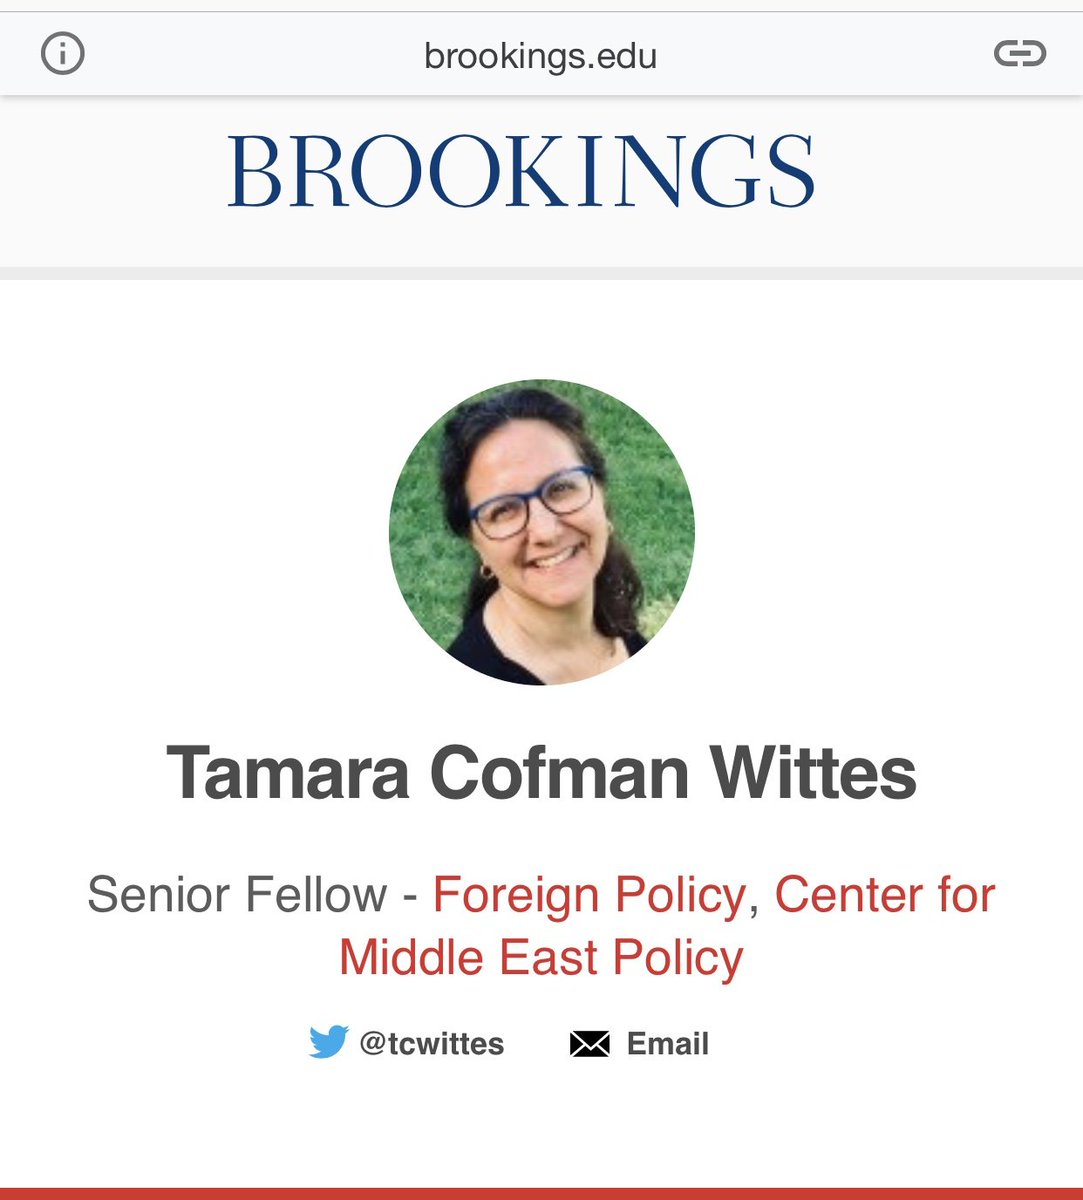 Tamara Cofman Wittes, State Dept, wife of Comey BFF Benjamin Wittes, senior fellow at Brookings where Xitler's nephew Xi Mingzhen worked as an intern and where Huawei made its donationBenjamin Wittes' Lawfare called for US taxpayer $ to fund schools with C**tfucius Inst.